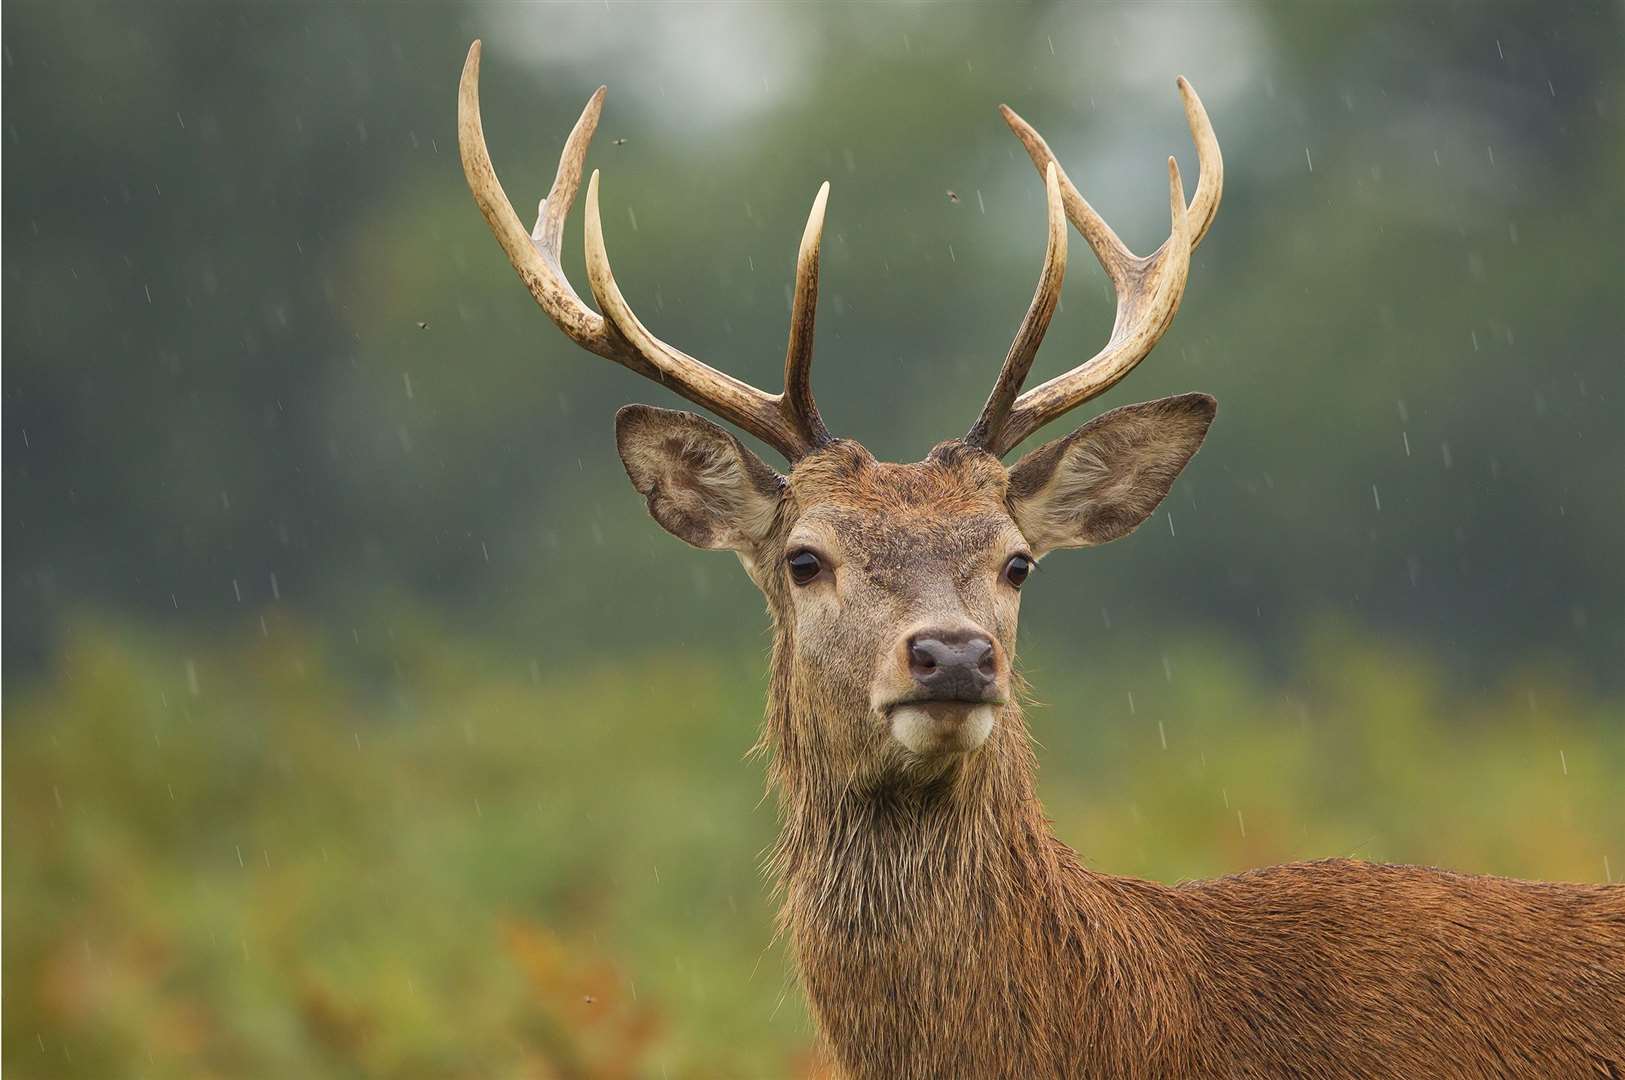 The red deer is an iconic sight in the Highlands.